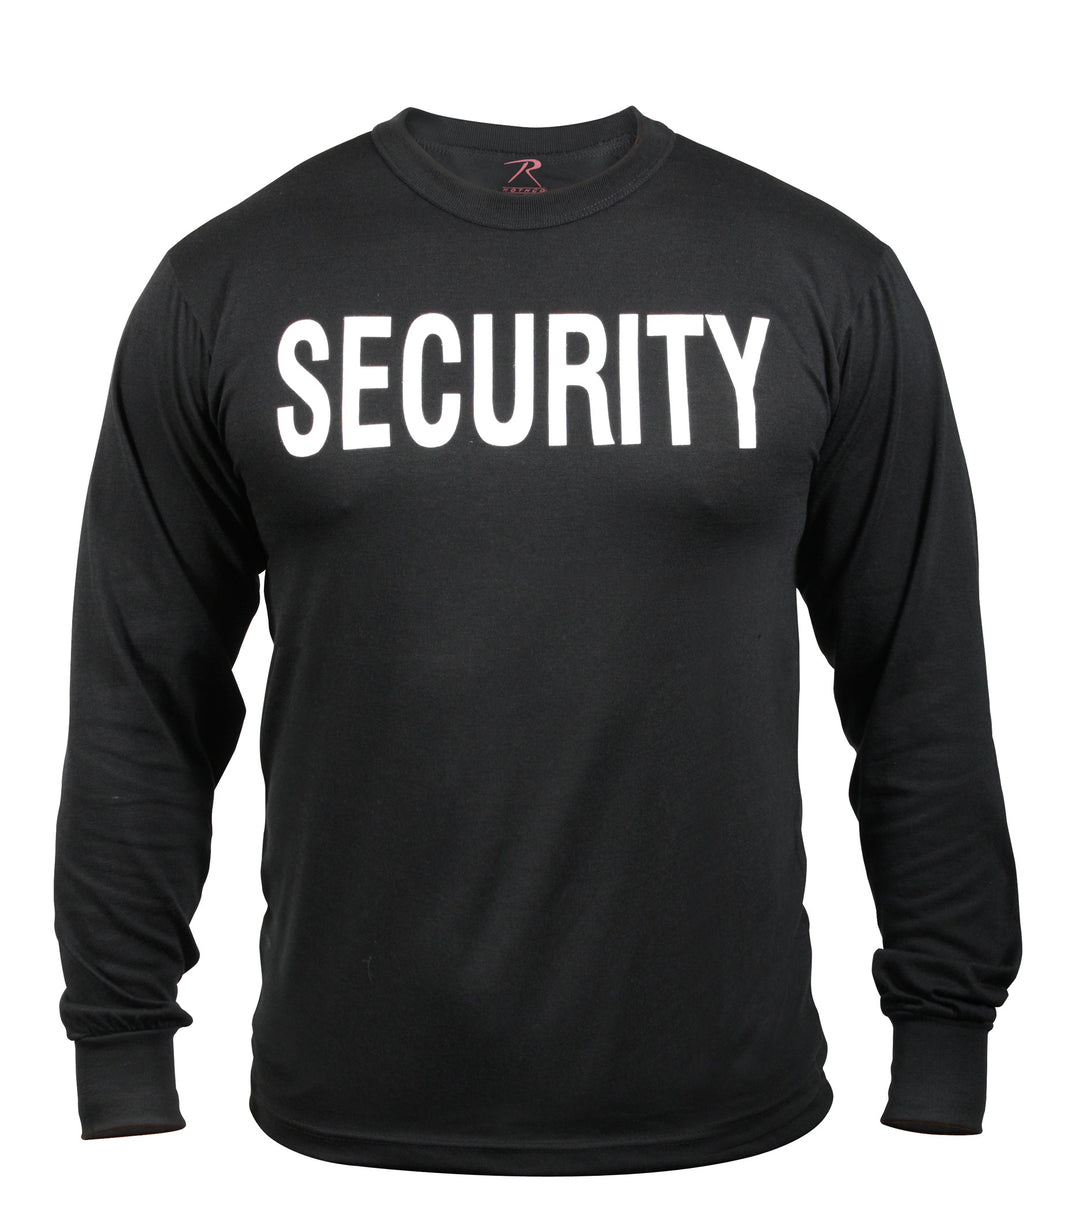 2-Sided Security Long Sleeve T-Shirt by Rothco